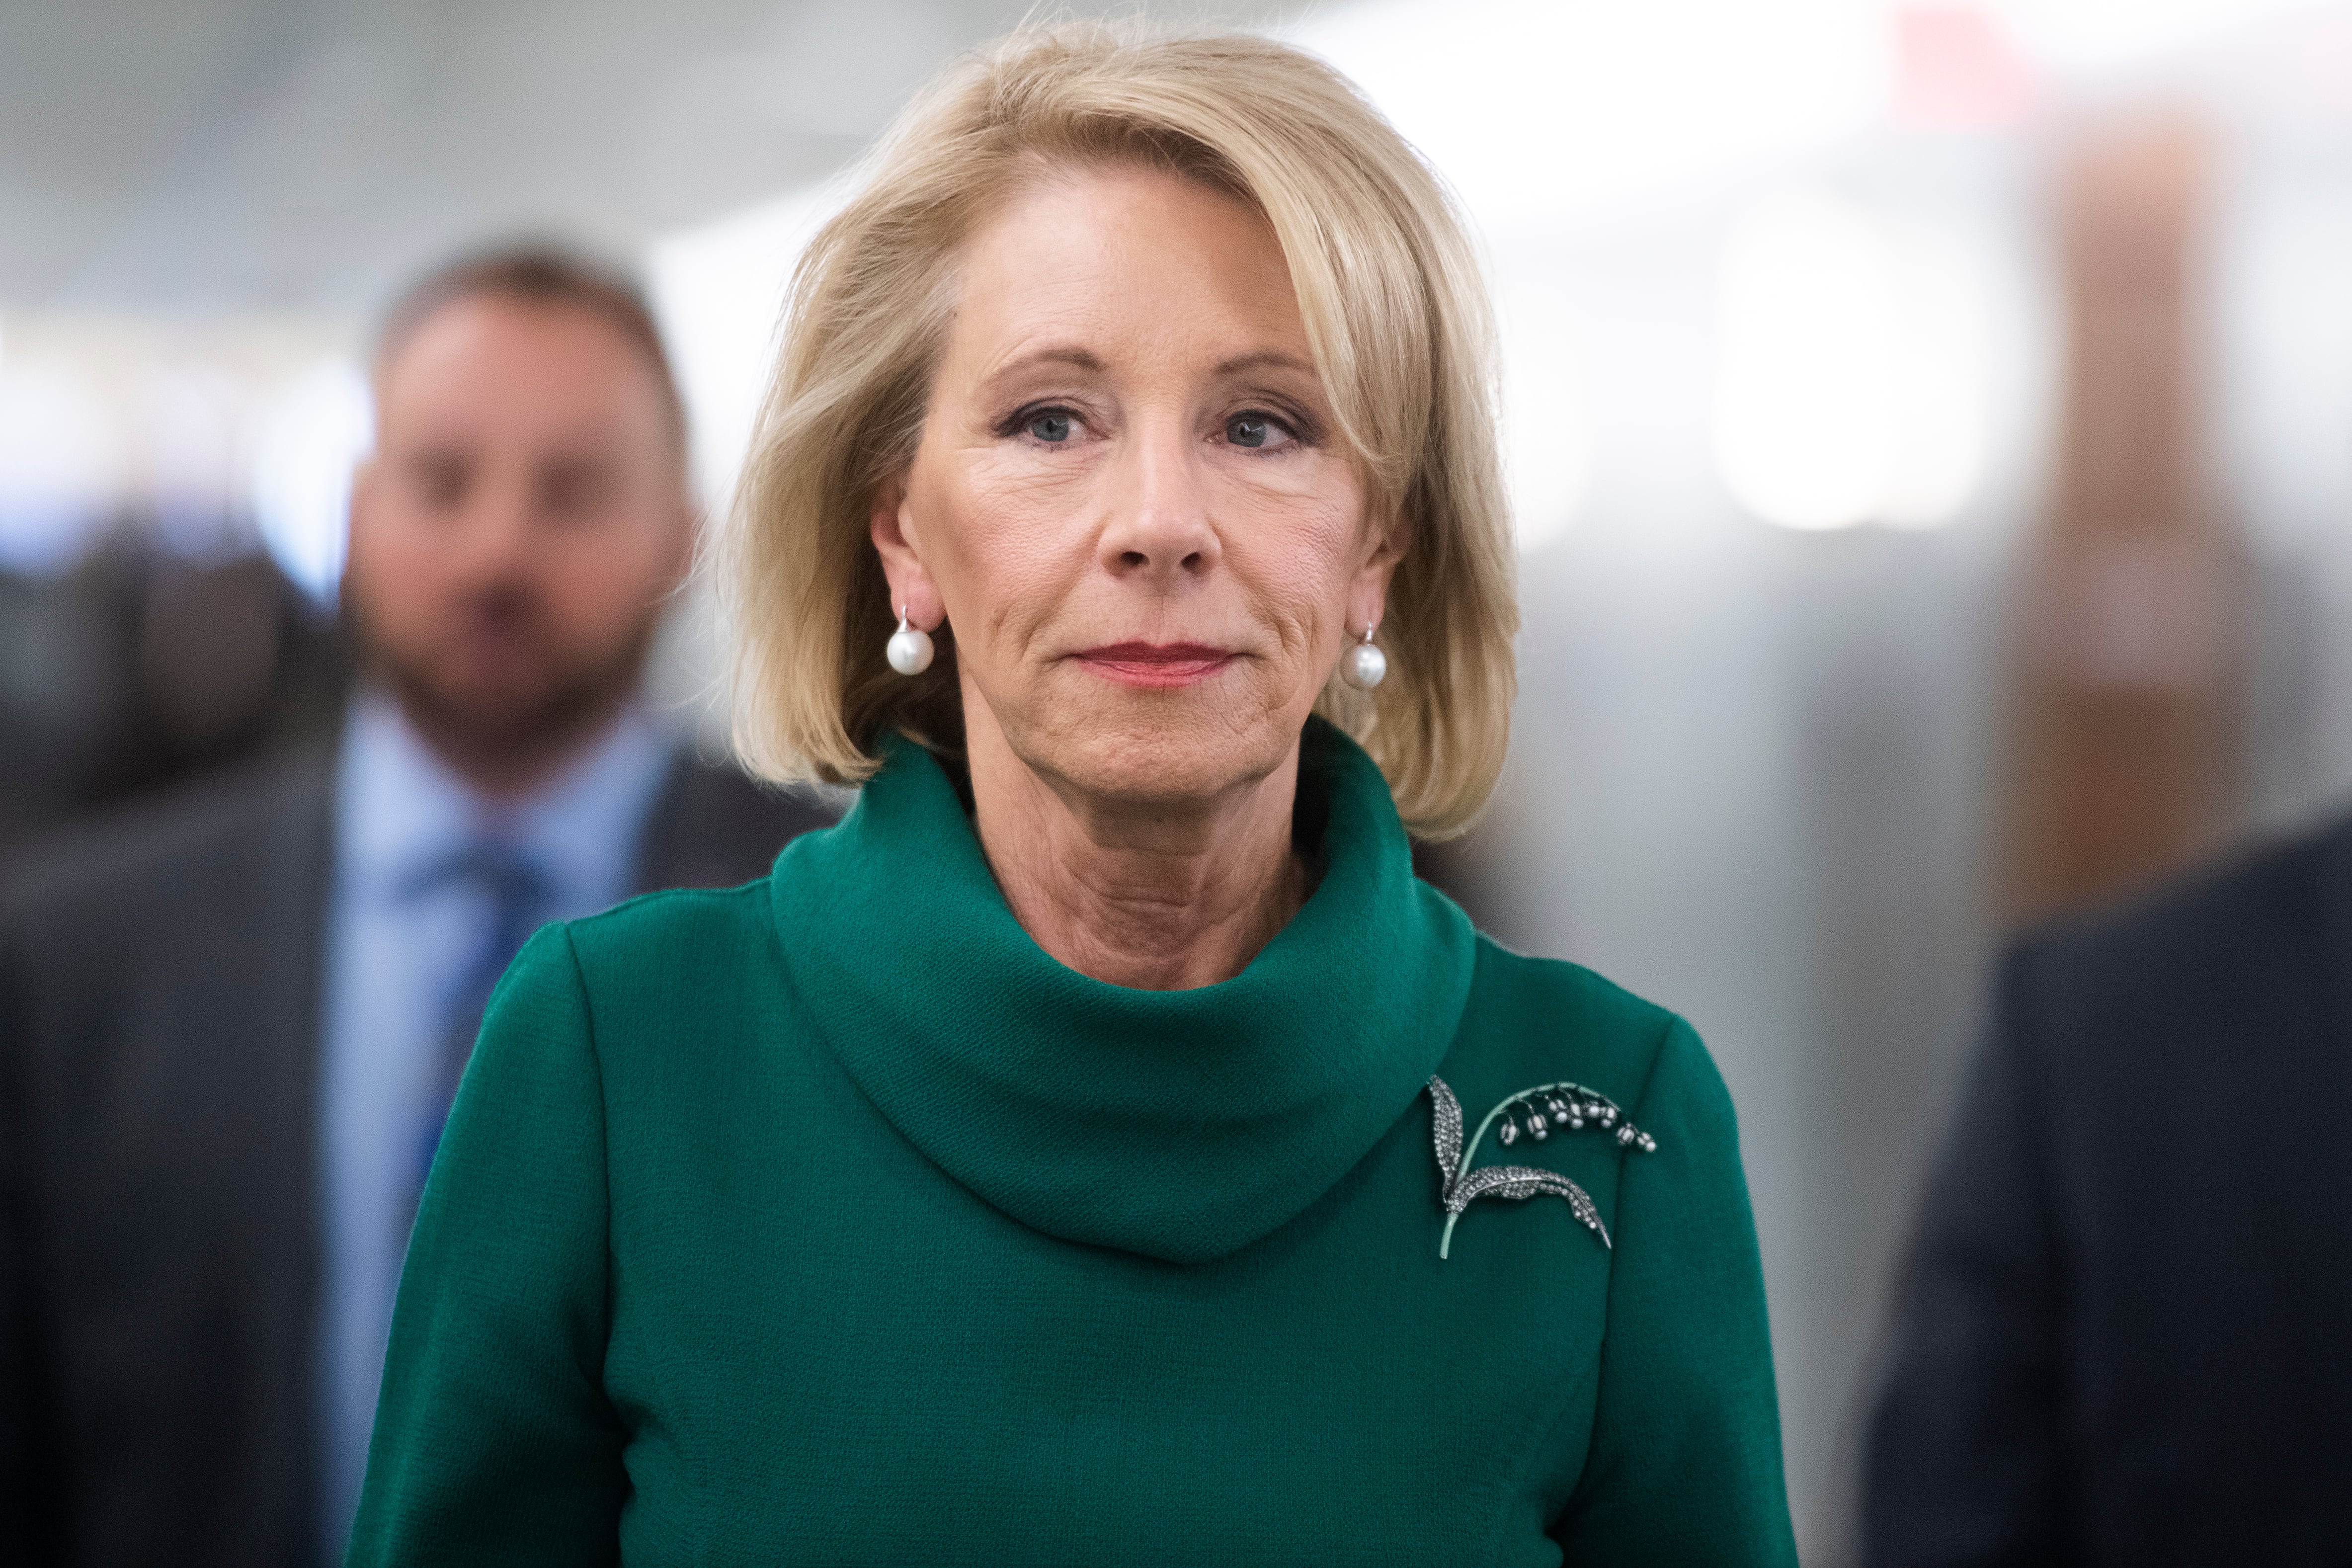 A photo of Betsy DeVos, the former U.S. Education Secretary, walking to a Congressional hearing.